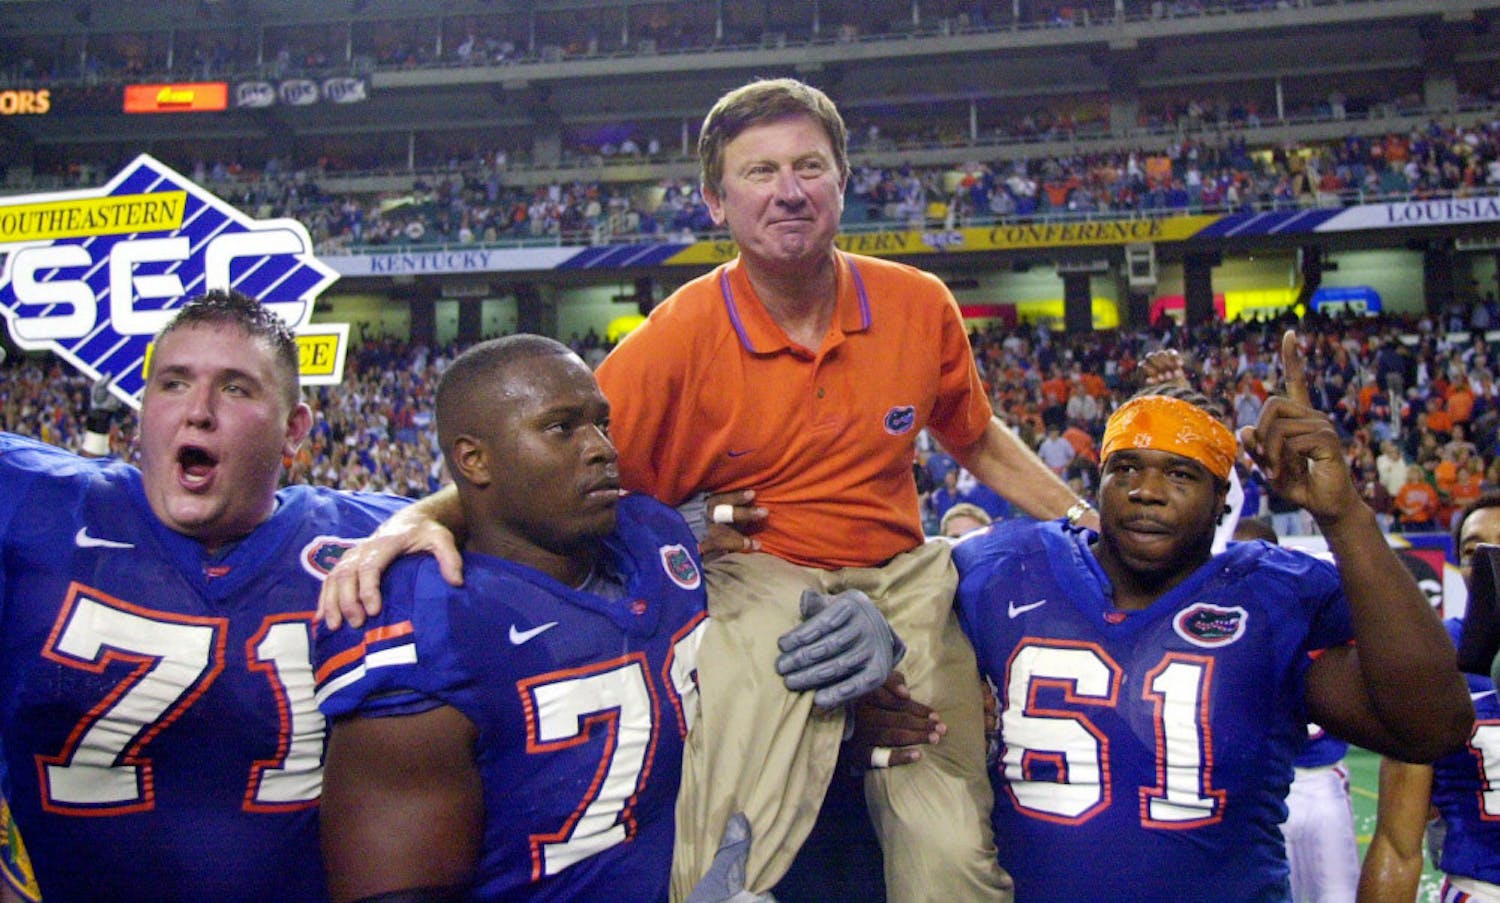 FILE - In this Dec. 2, 2000, file photo, Florida head coach Steve Spurrier is carried off the field by Mike Pearson (71), Kenyatta Walker (78) and Gerard Warren (61) after the Gators downed Auburn 28-6 in the SEC Championship NCAA college football game at the Georgia Dome in Atlanta. Florida is renaming its football field after former coach Steve Spurrier. The university's board of trustees approved the change Thursday, June 9,2016, making it Steve Spurrier-Florida Field at Ben Hill Griffin Stadium. (AP Photo/John Bazemore, File)